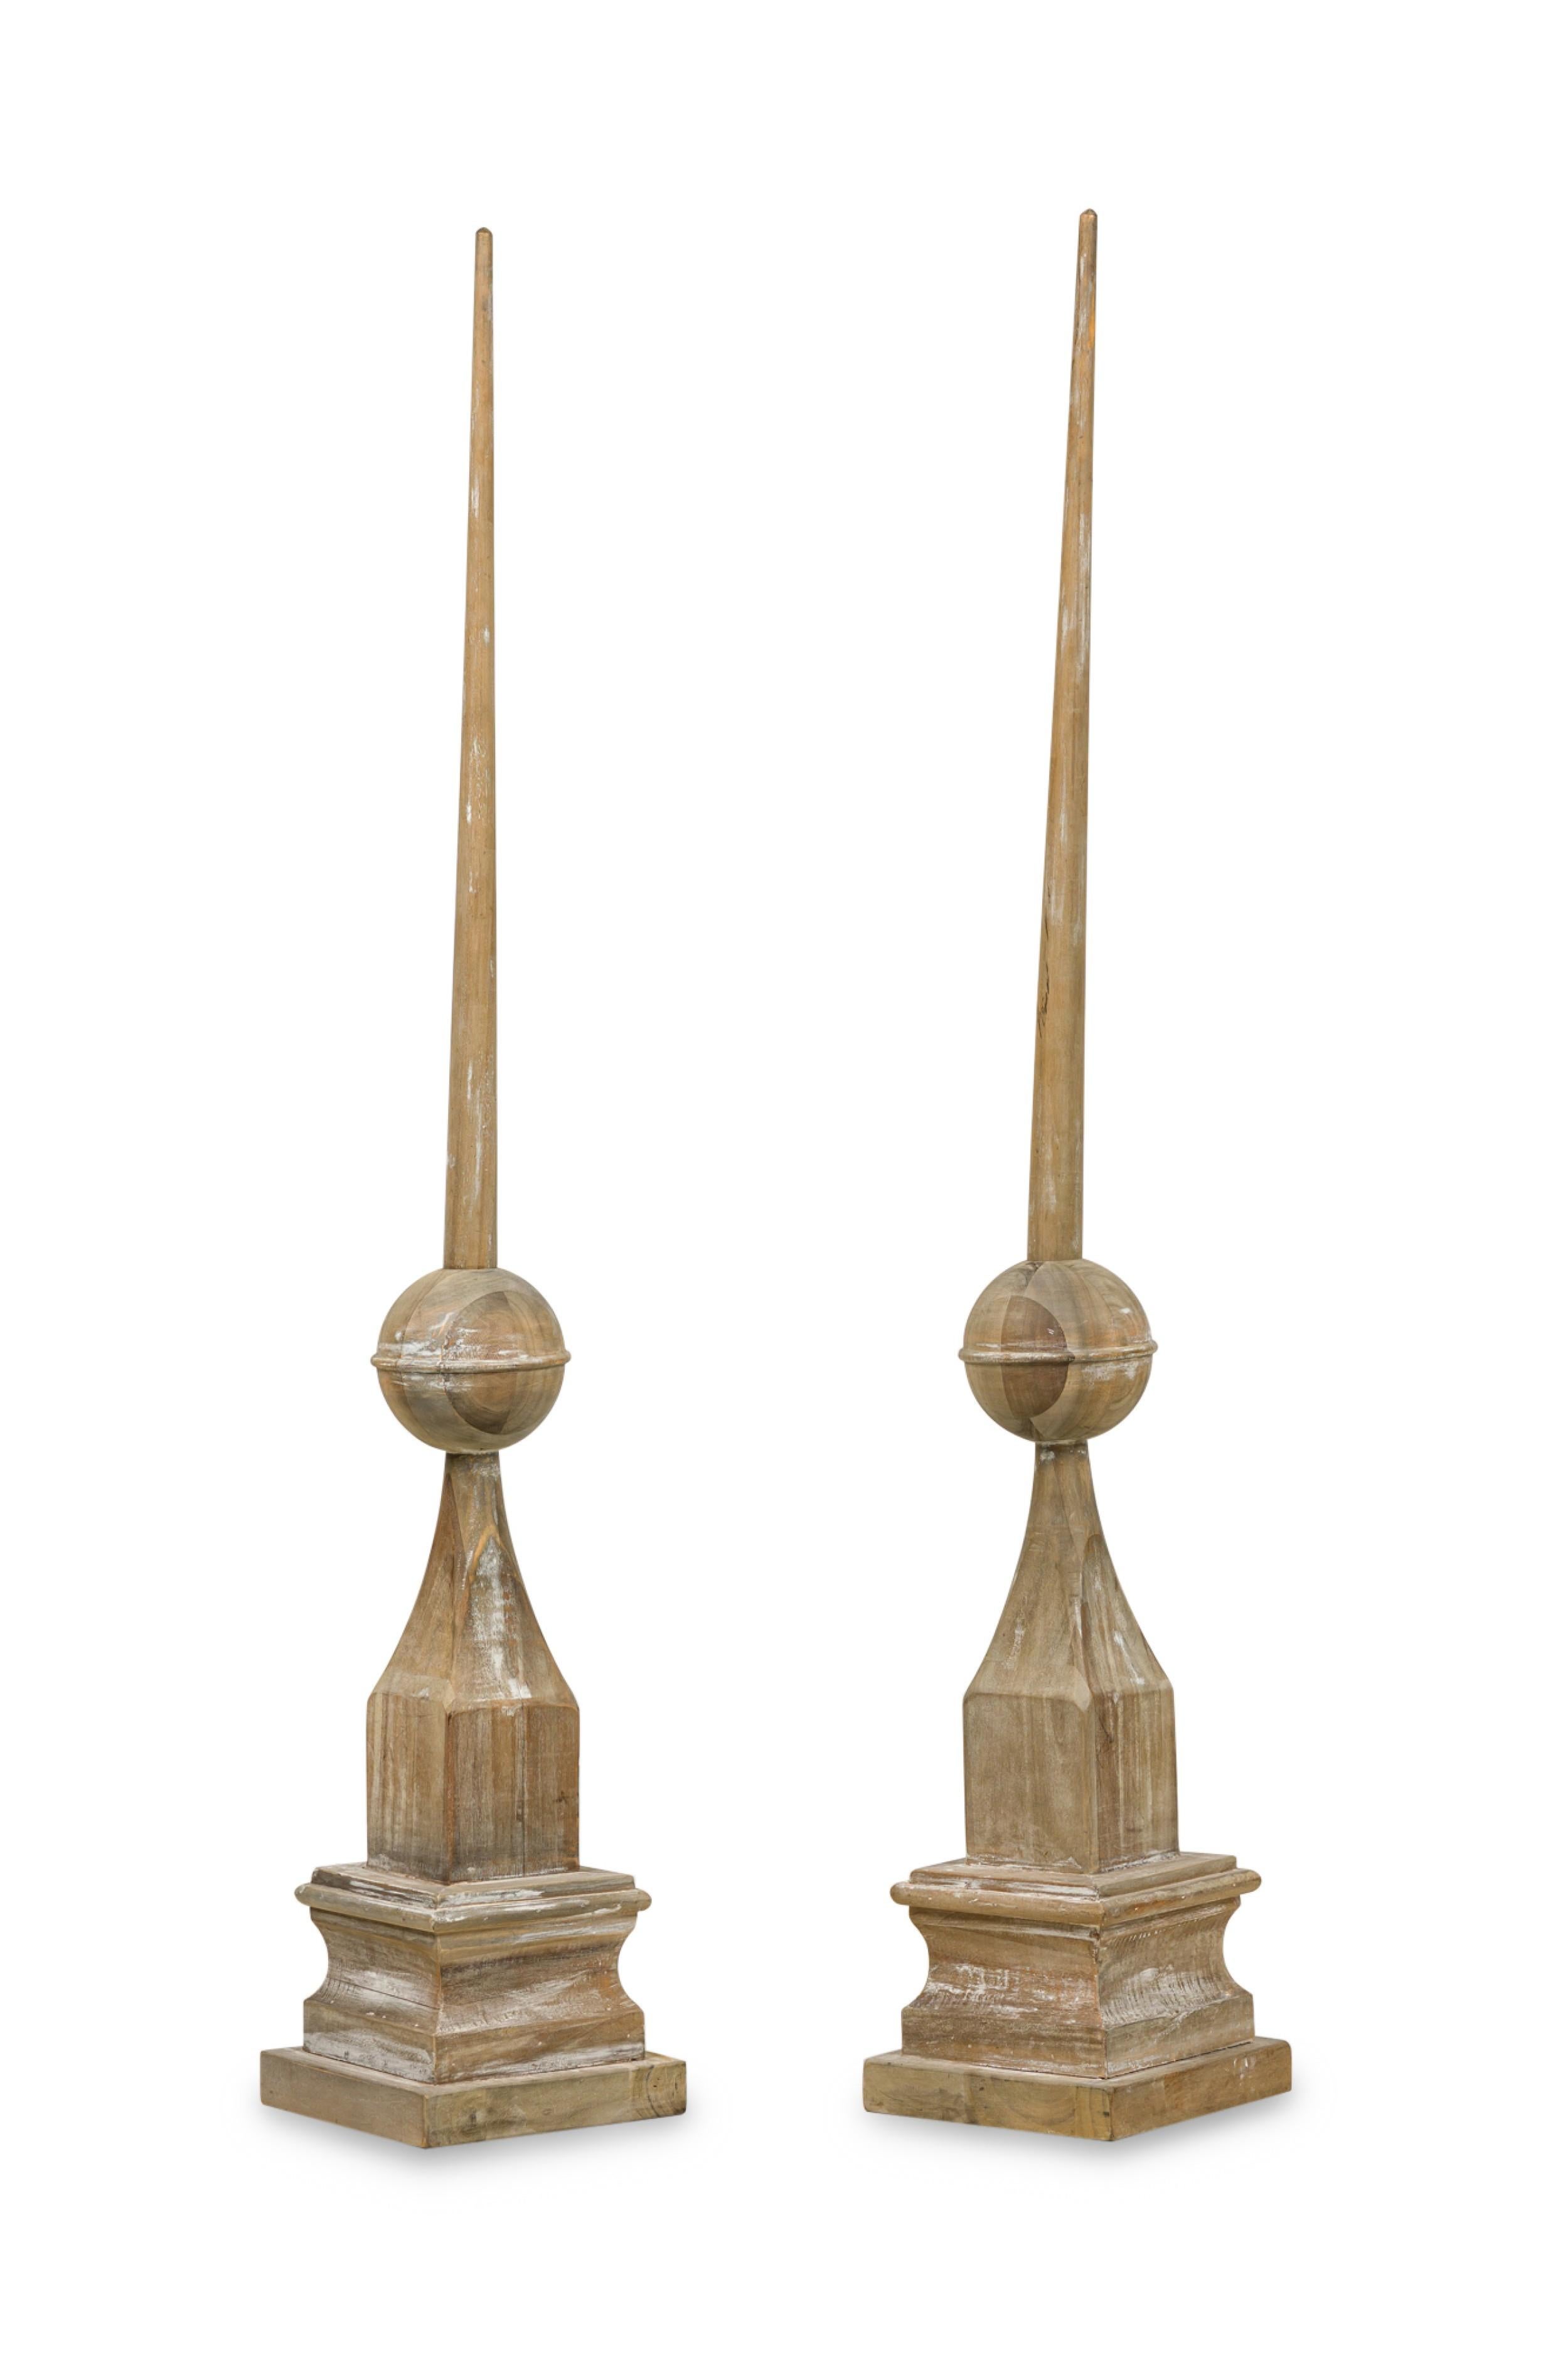 PAIR of American (20th Century) large stripped wood architectual elements having a ball finial top over a bottle form and resting on a square tiered base (PRICED AS PAIR)
 

 Condition: Good; Wear consistent with age and use